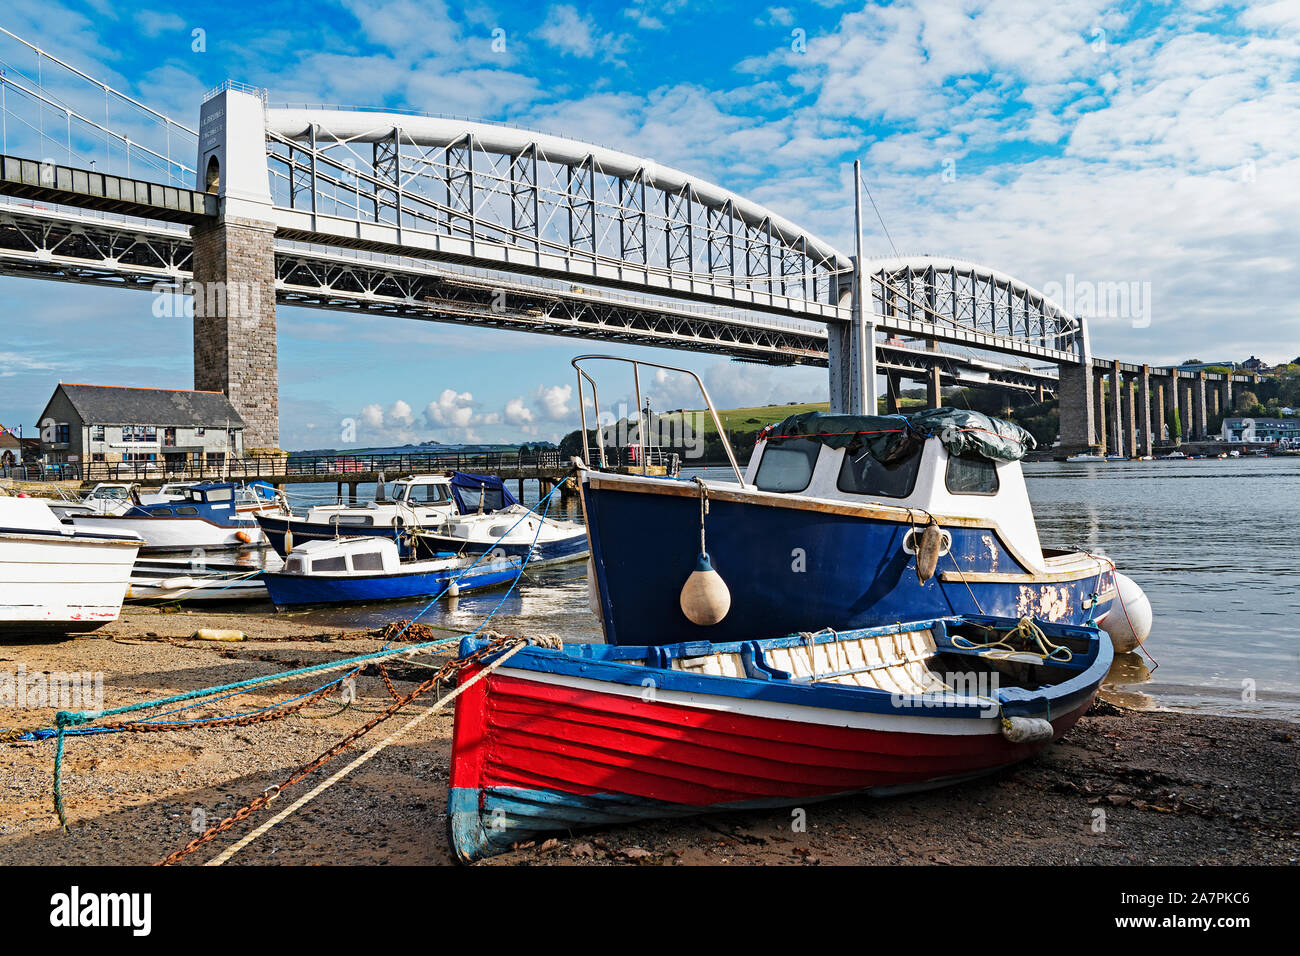 fishing boats by the river tamar in saltash cornwall, the famous royal albert bridge designed by isambard kingdom brunel in the background Stock Photo